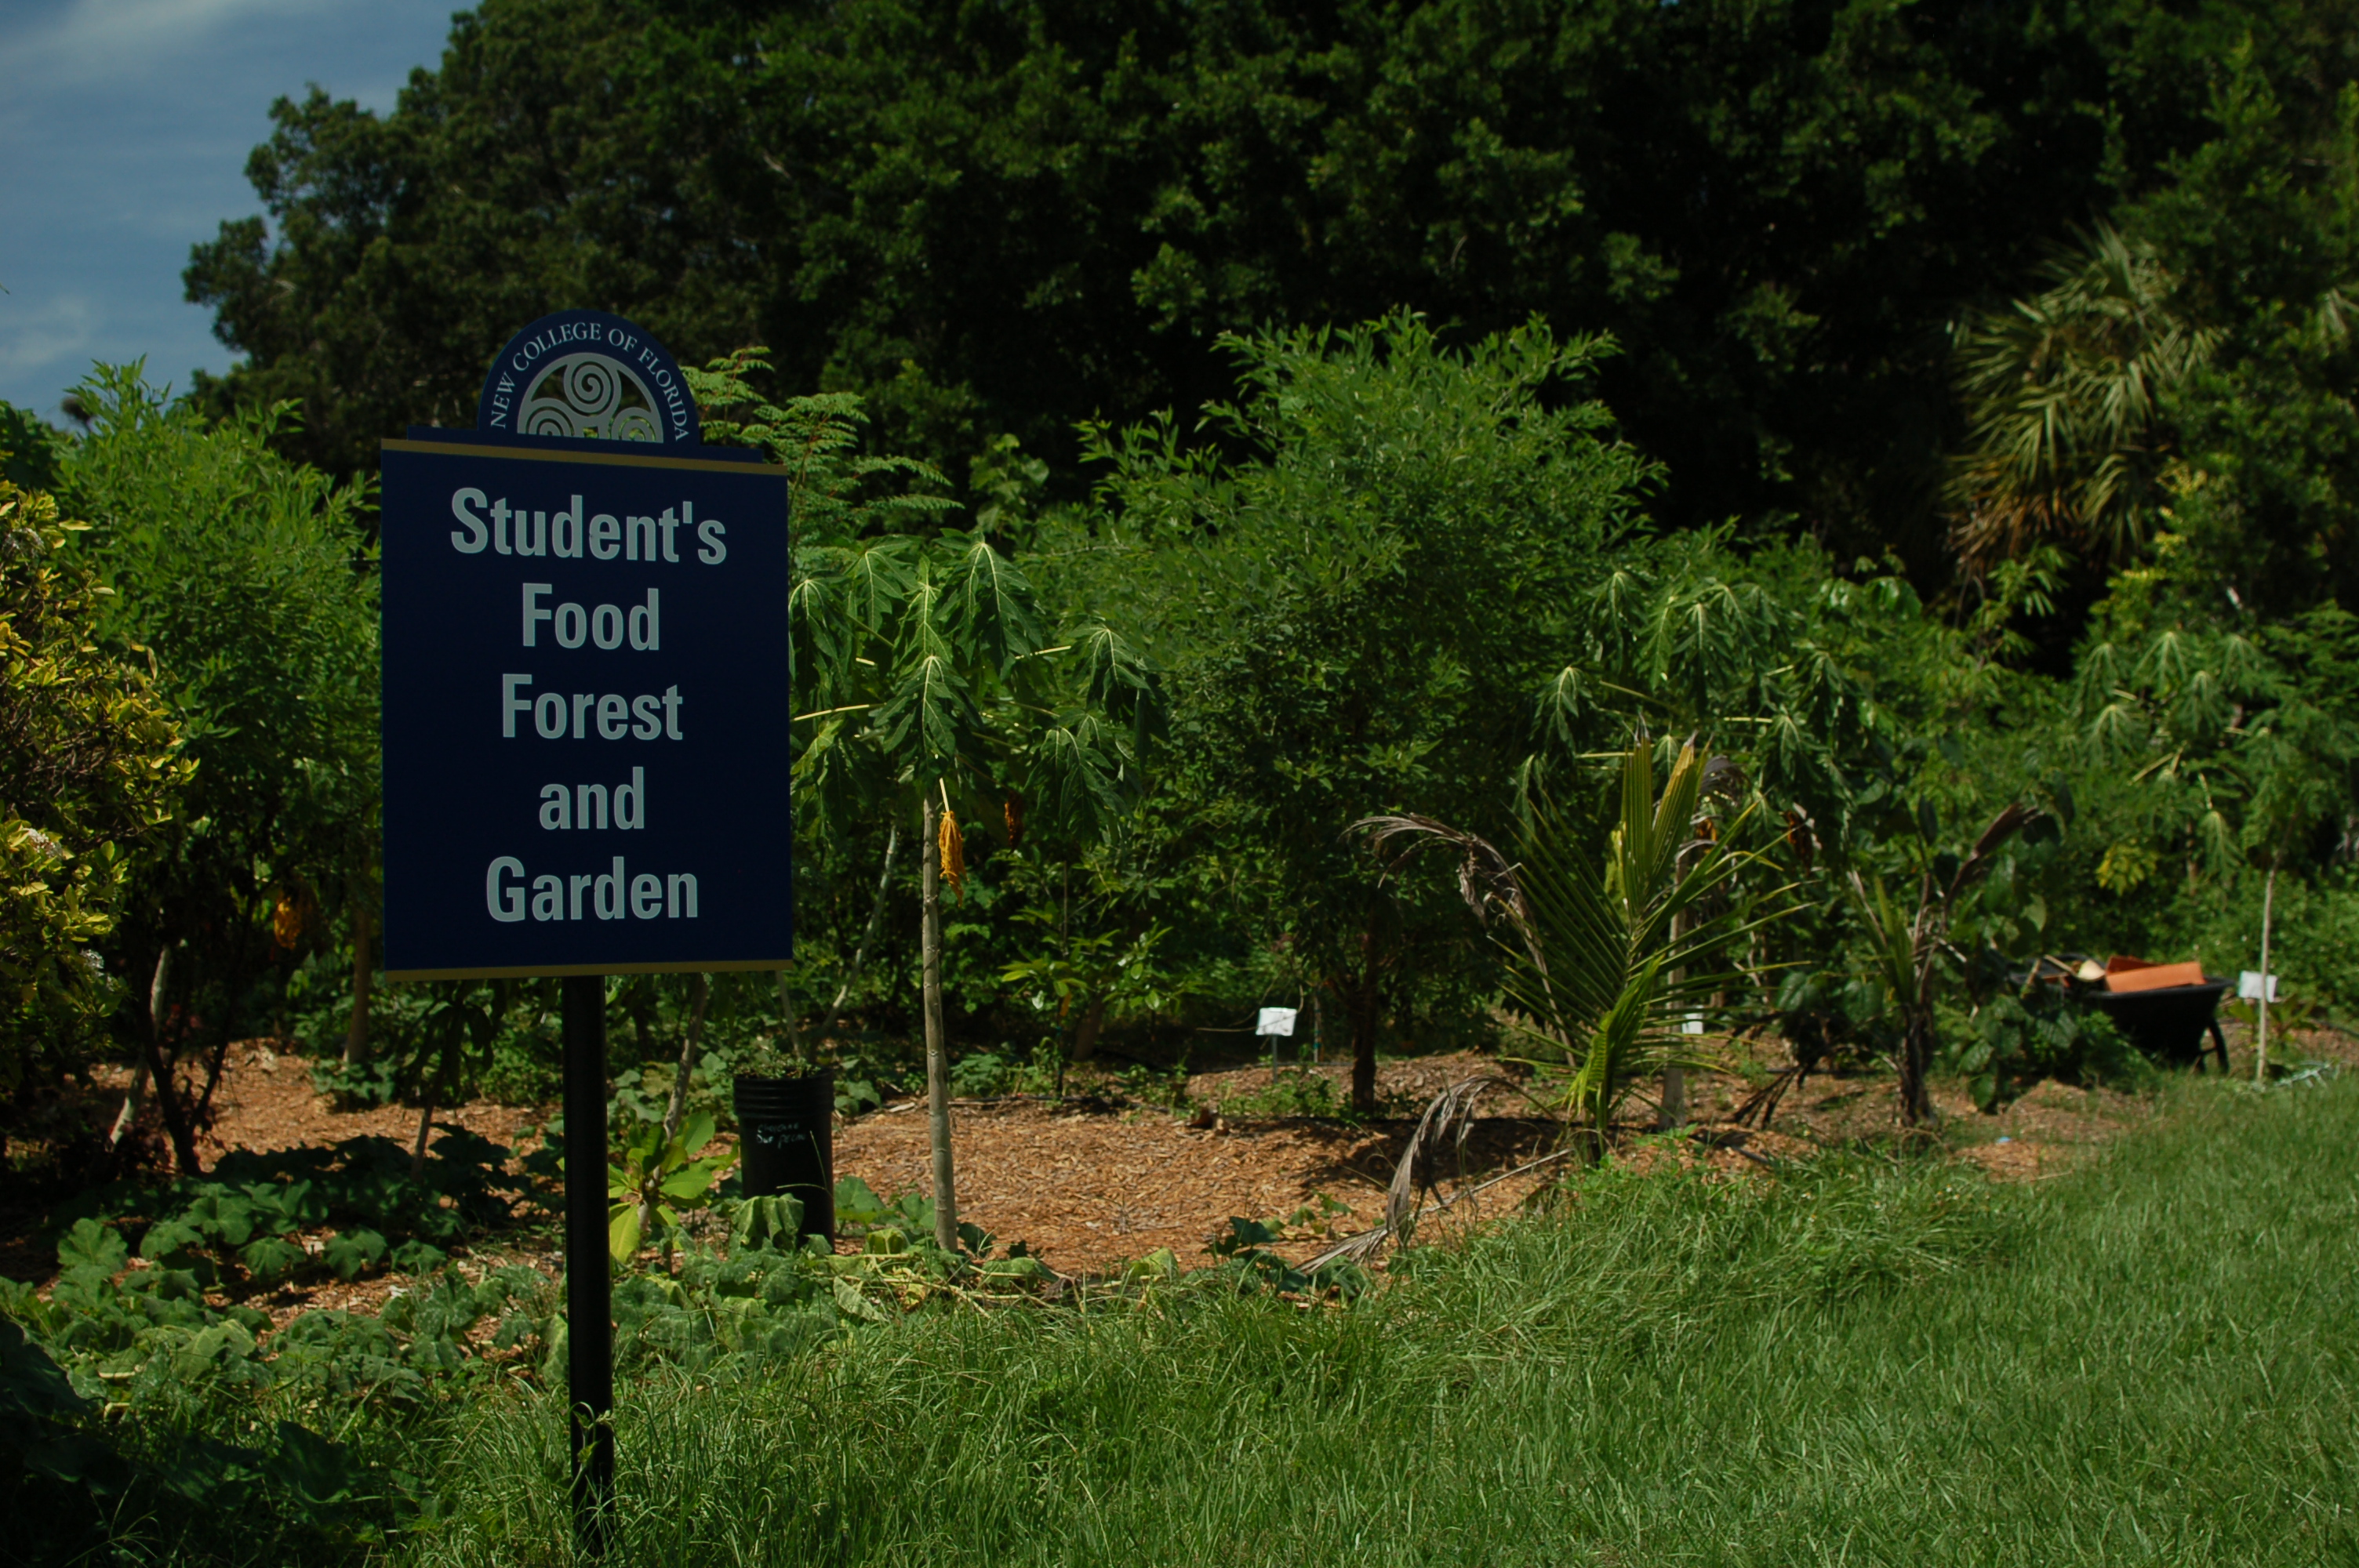 Exercise your green thumb with the Caples Food Forest and Garden Club